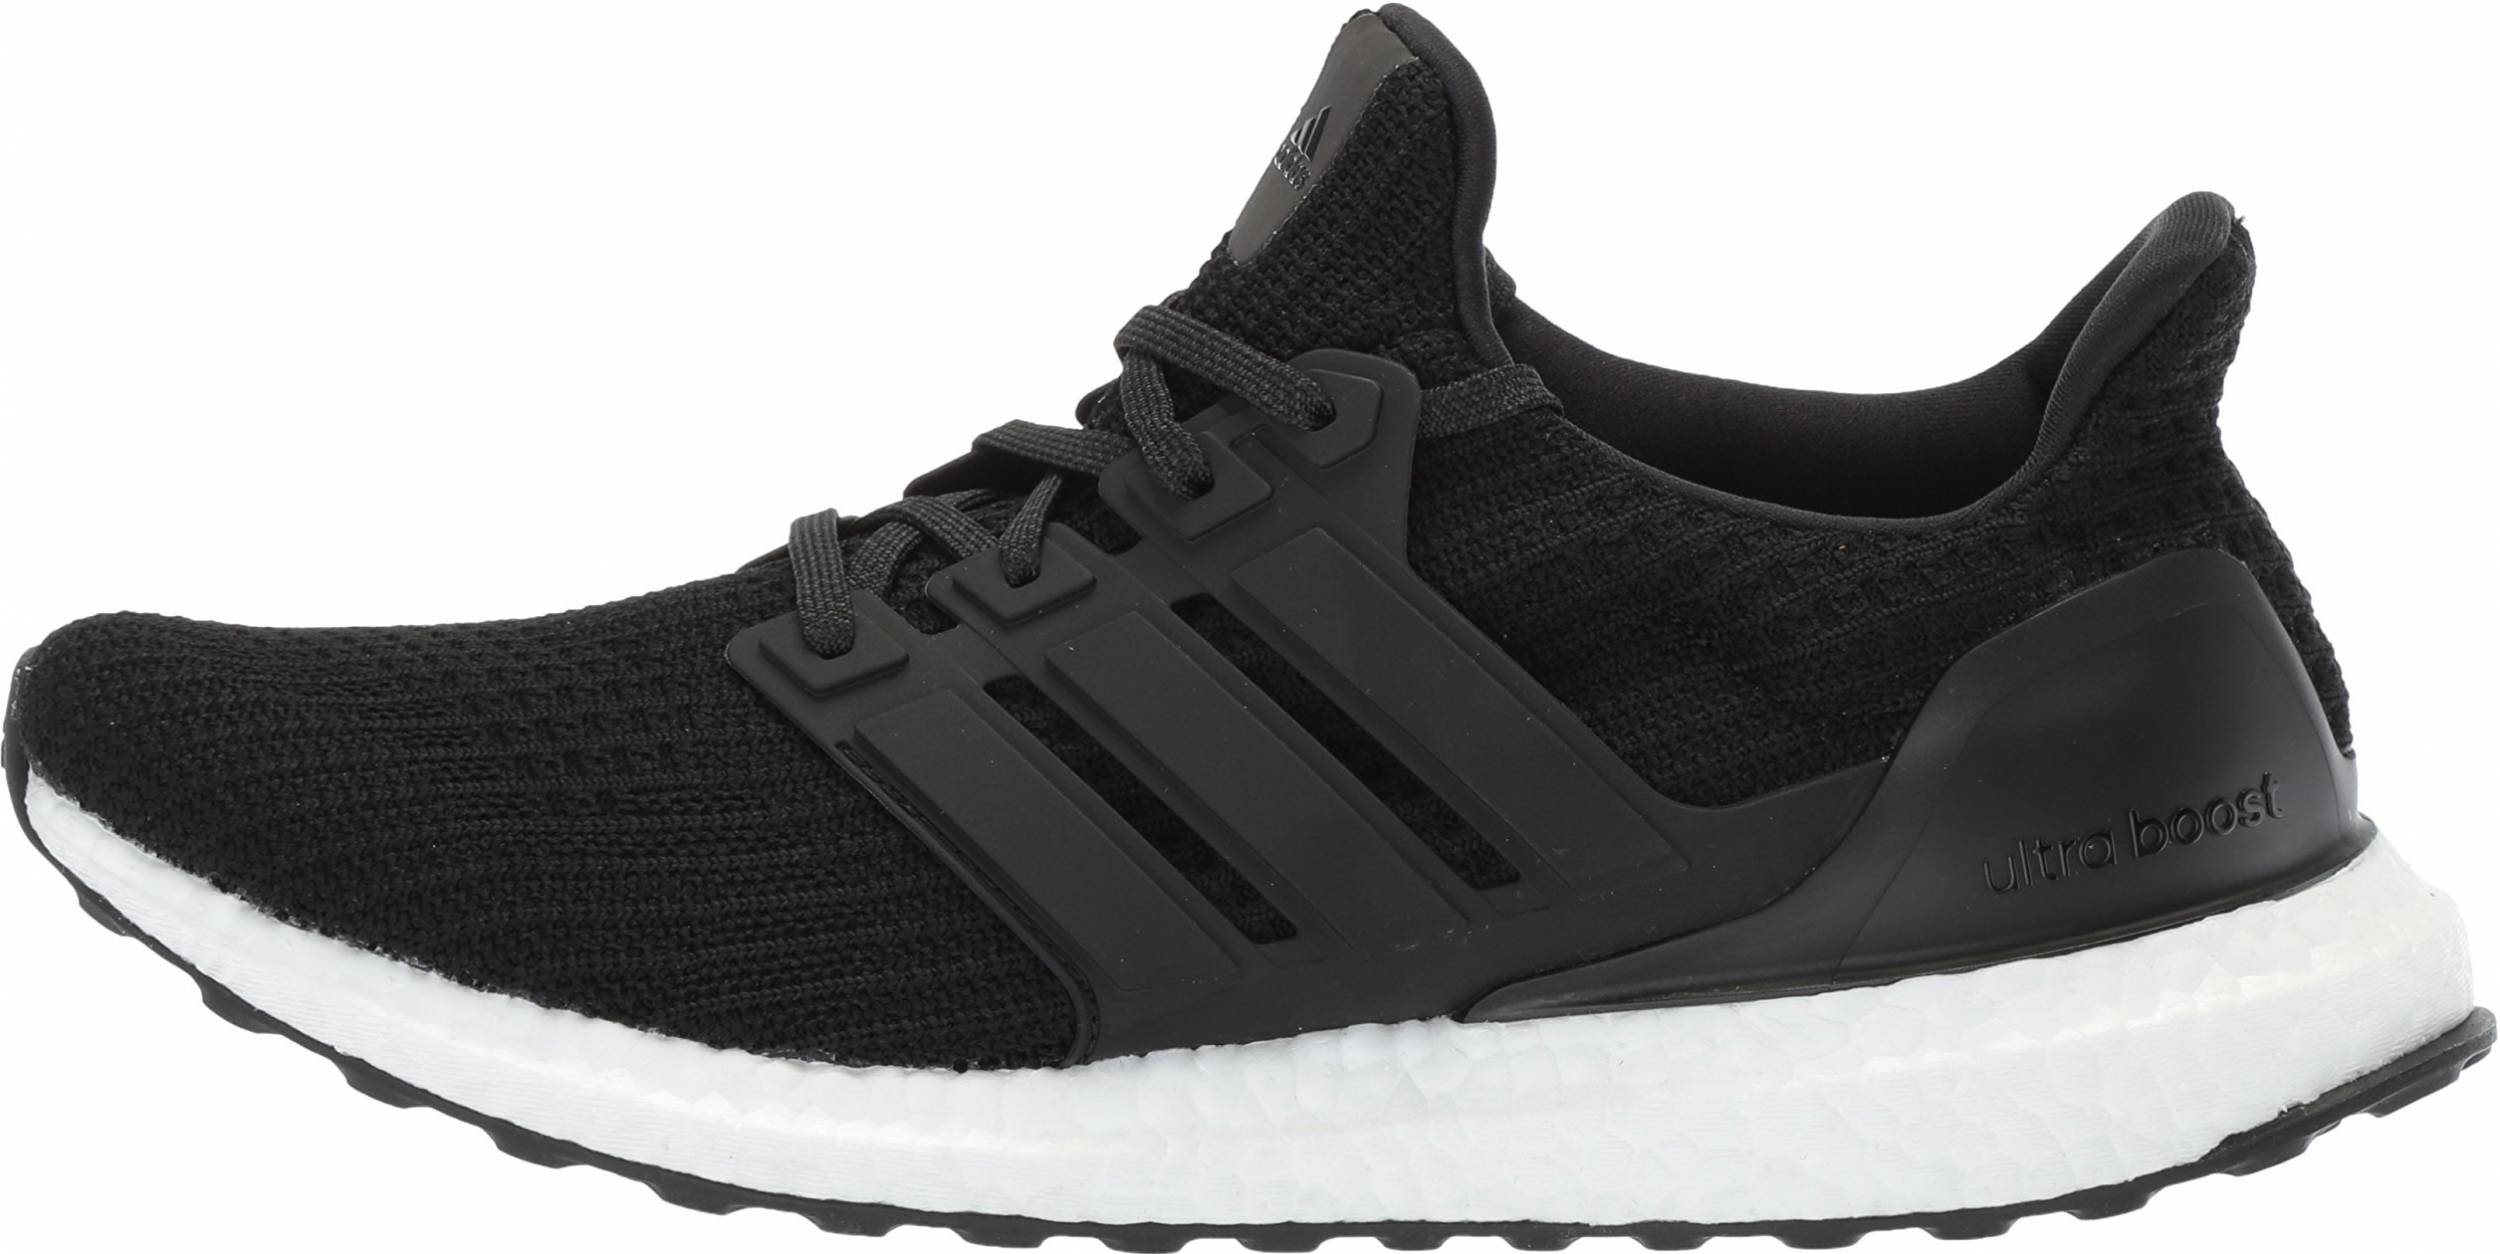 Only $70 + Review of Adidas Ultraboost 